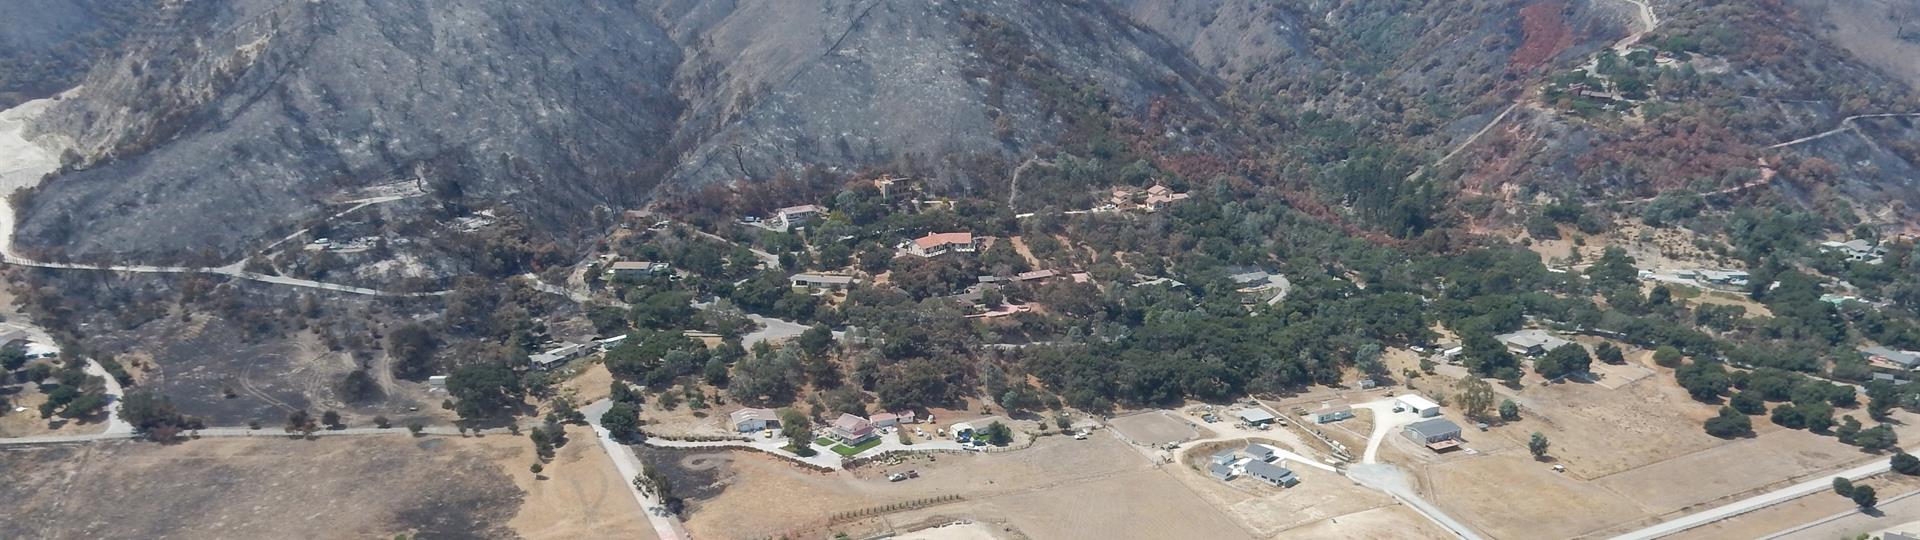 Mountains denuded by wildfire loom over homes on flat land below. The figure caption provides more information.